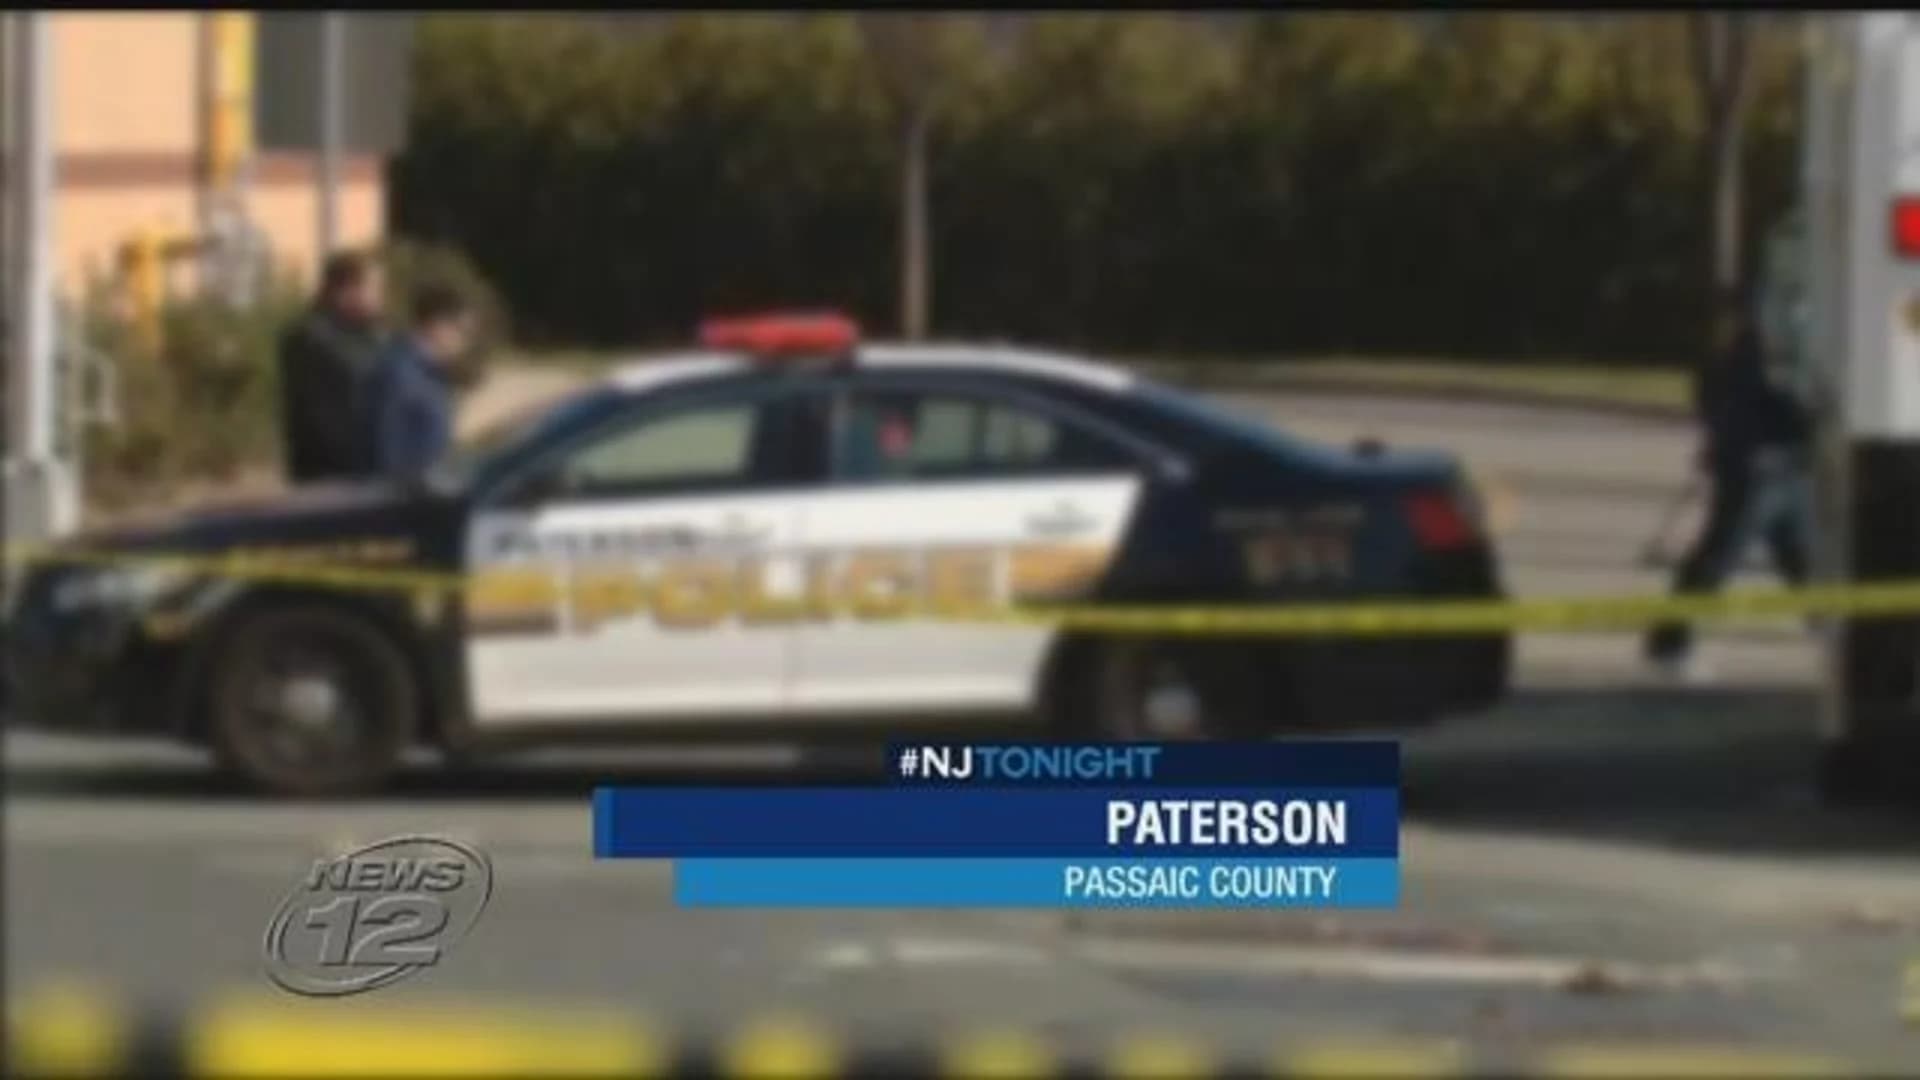 Paterson mayor: ‘I’m determined to rid our city of crooked cops’